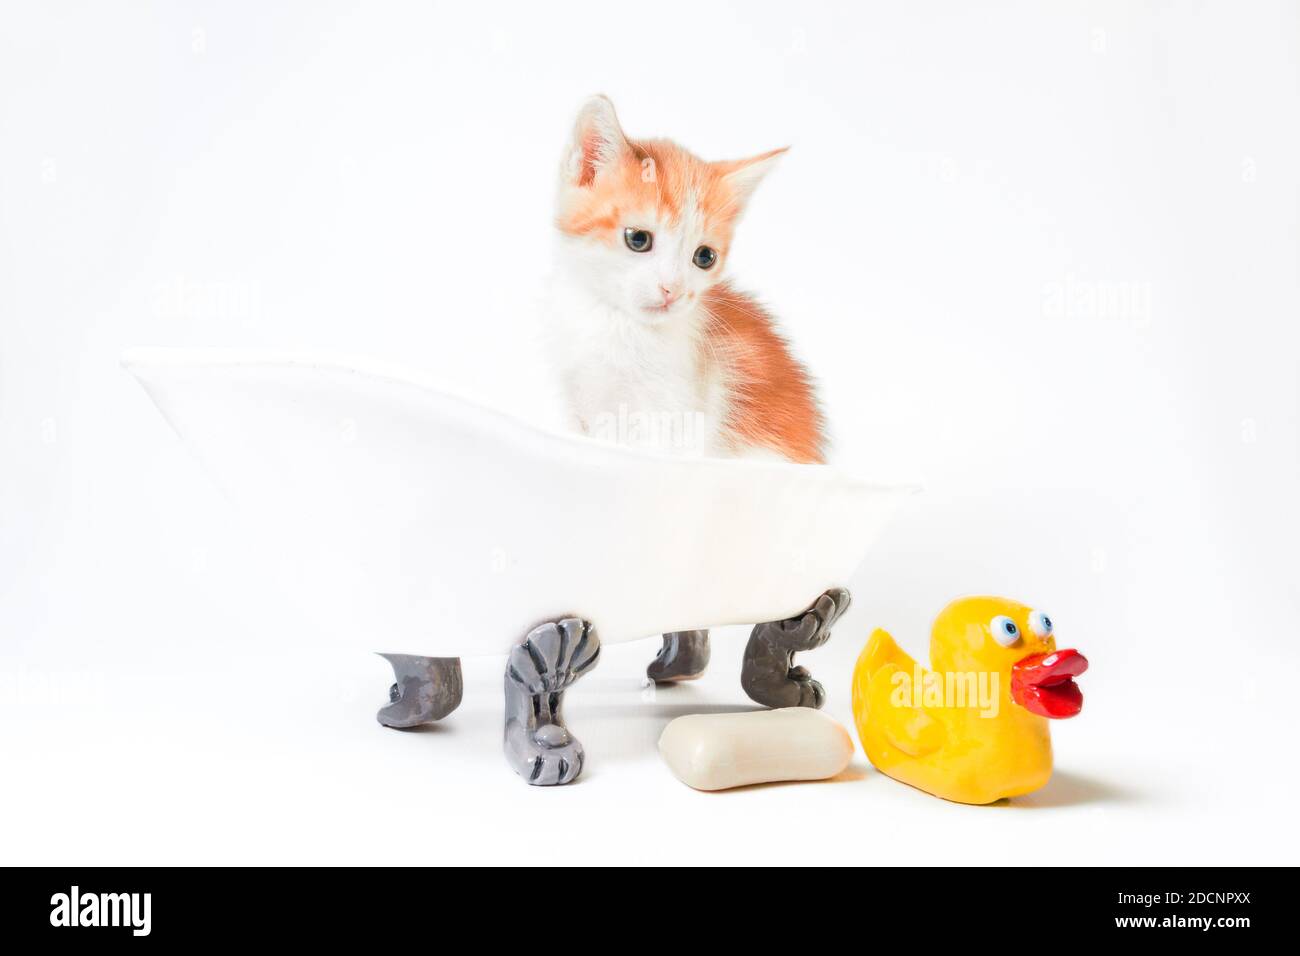 grooming red and white kitten sits in a toy bathtub next to a bar of soap and a yellow rubber duckie Stock Photo